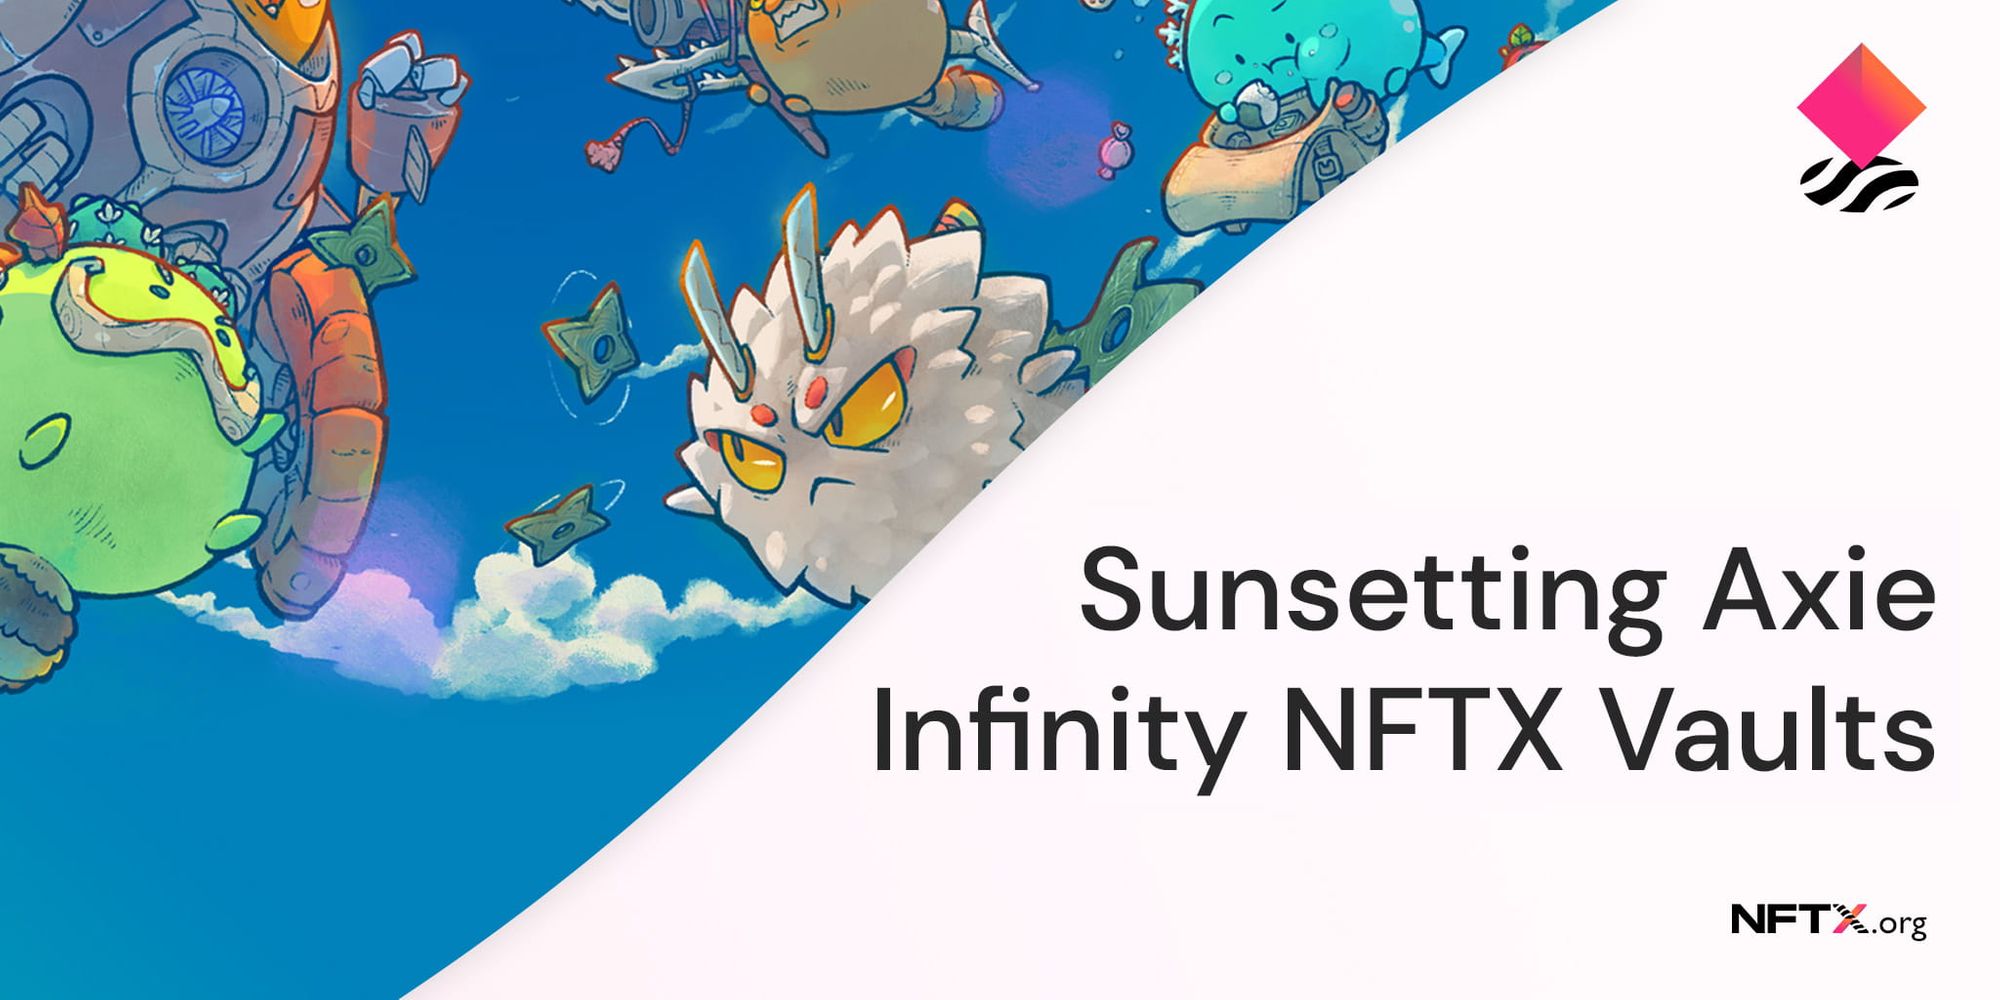 Sunsetting Axie Infinity NFTX Vaults